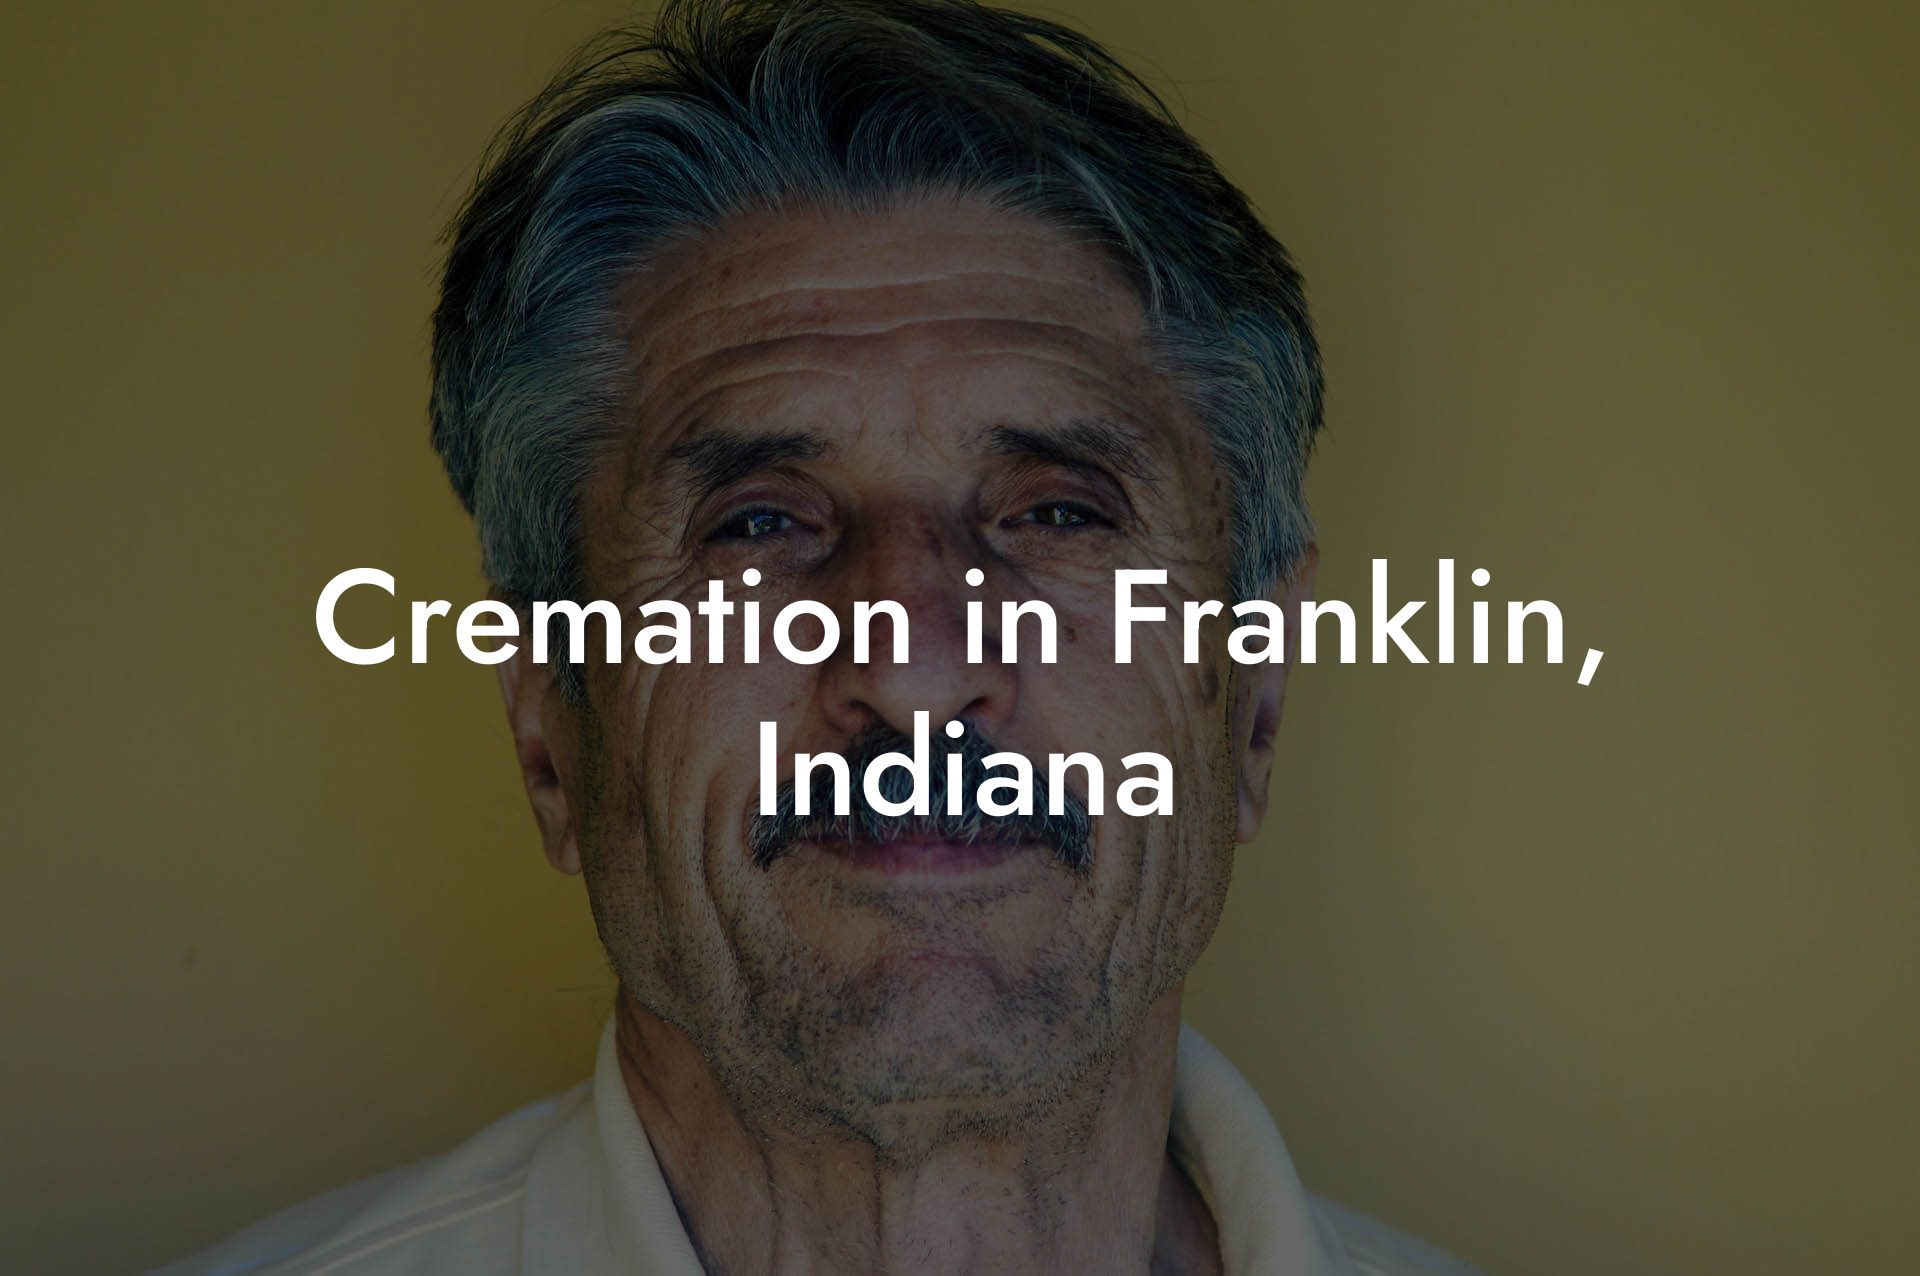 Cremation in Franklin, Indiana